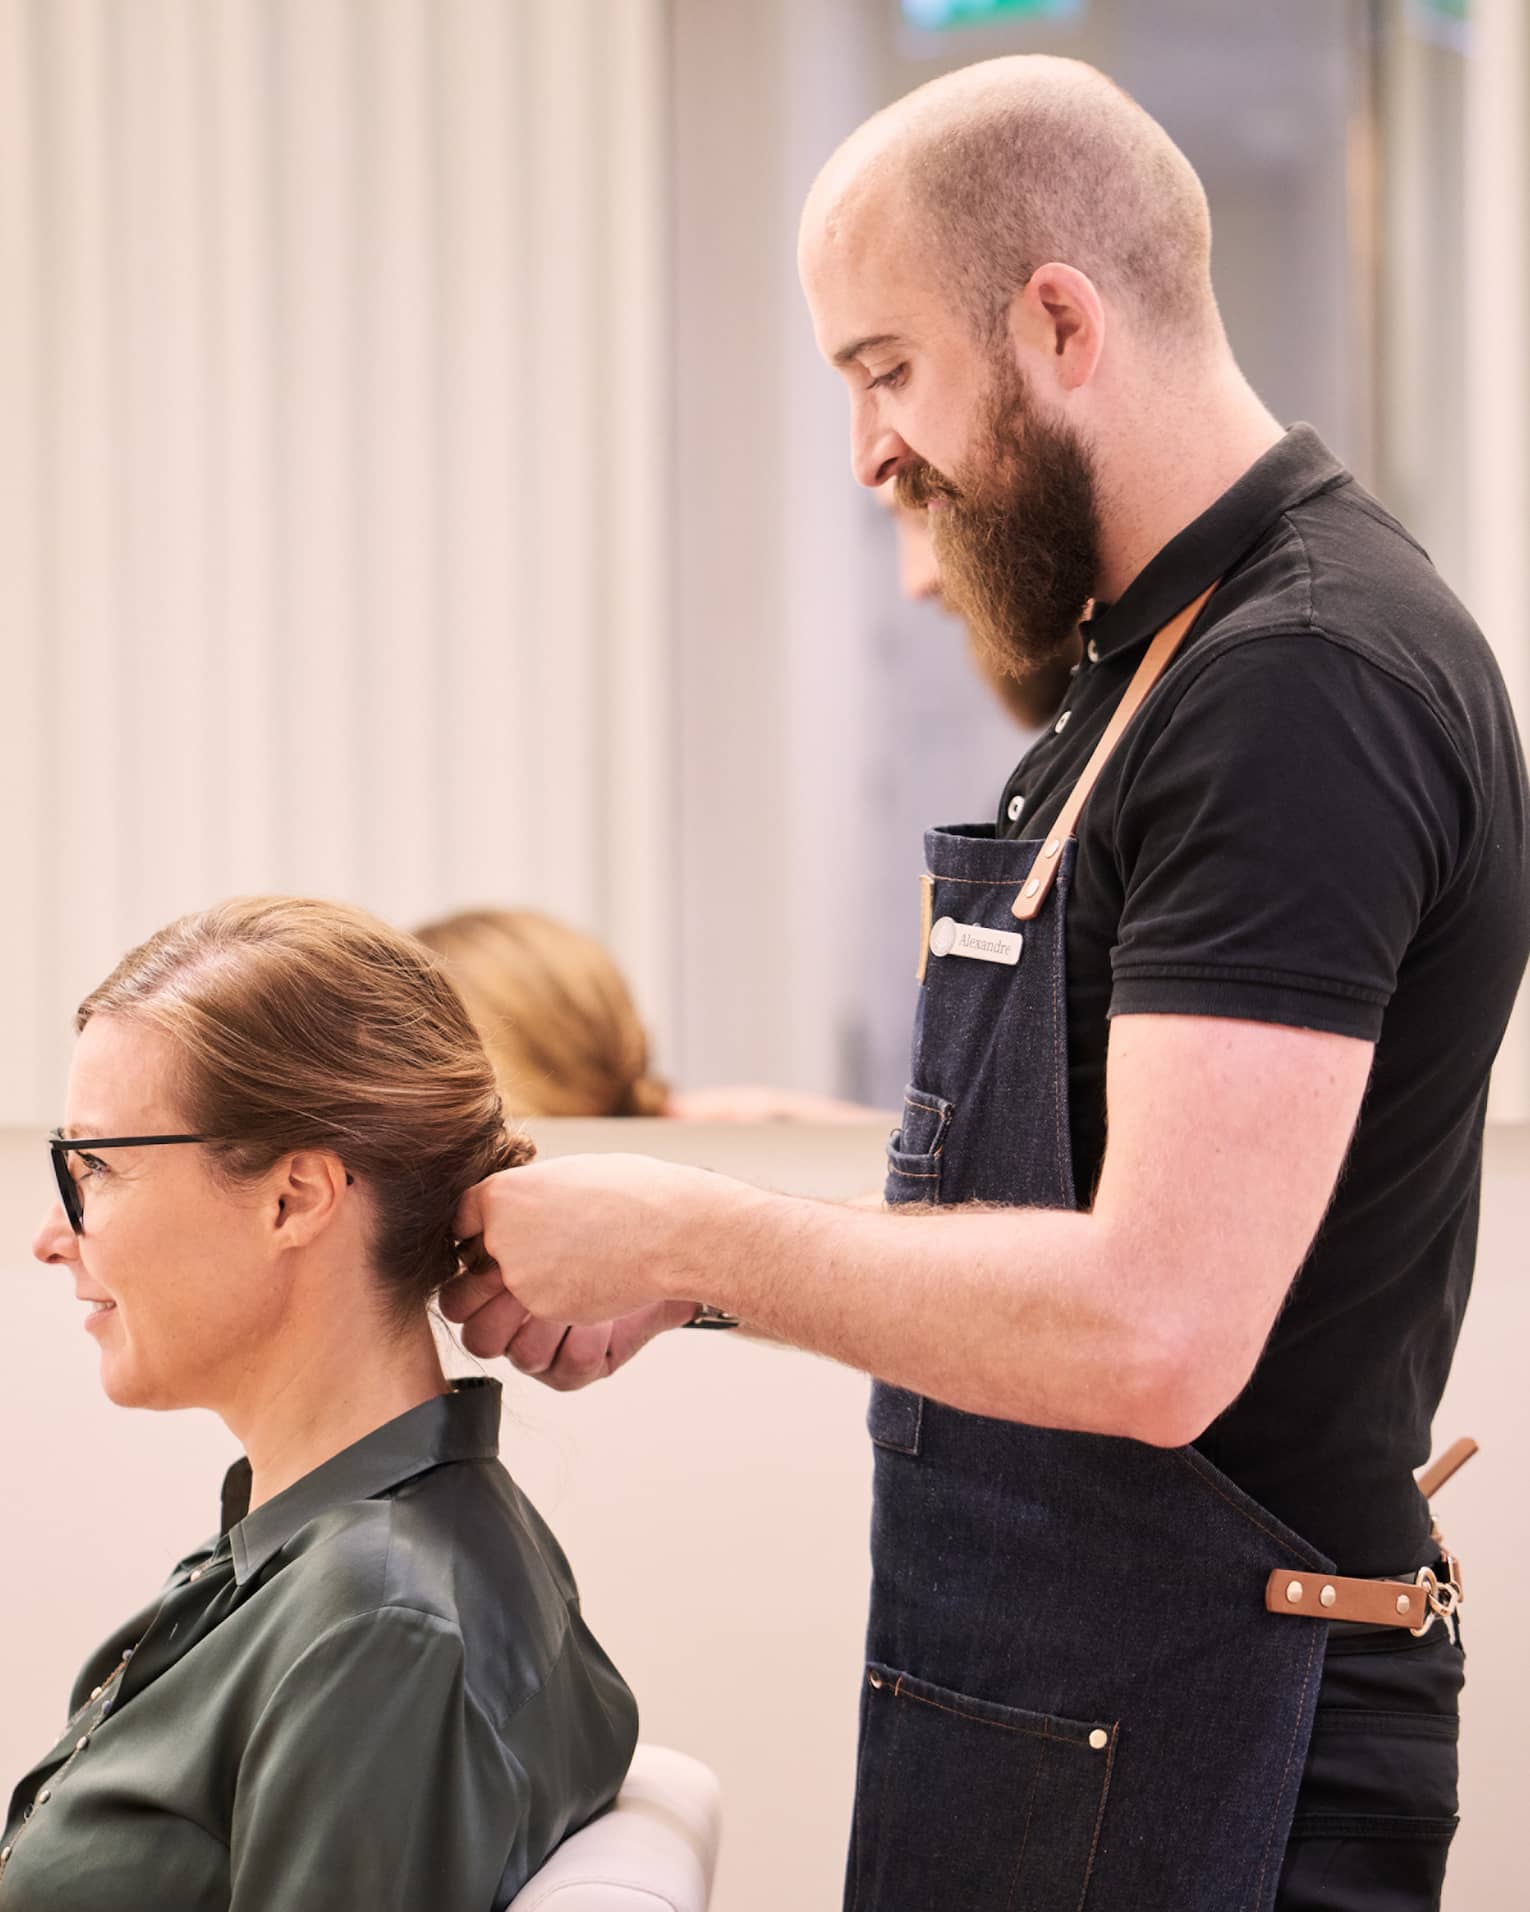 Woman sits in salon chair as hair stylist with long beard holds her hair